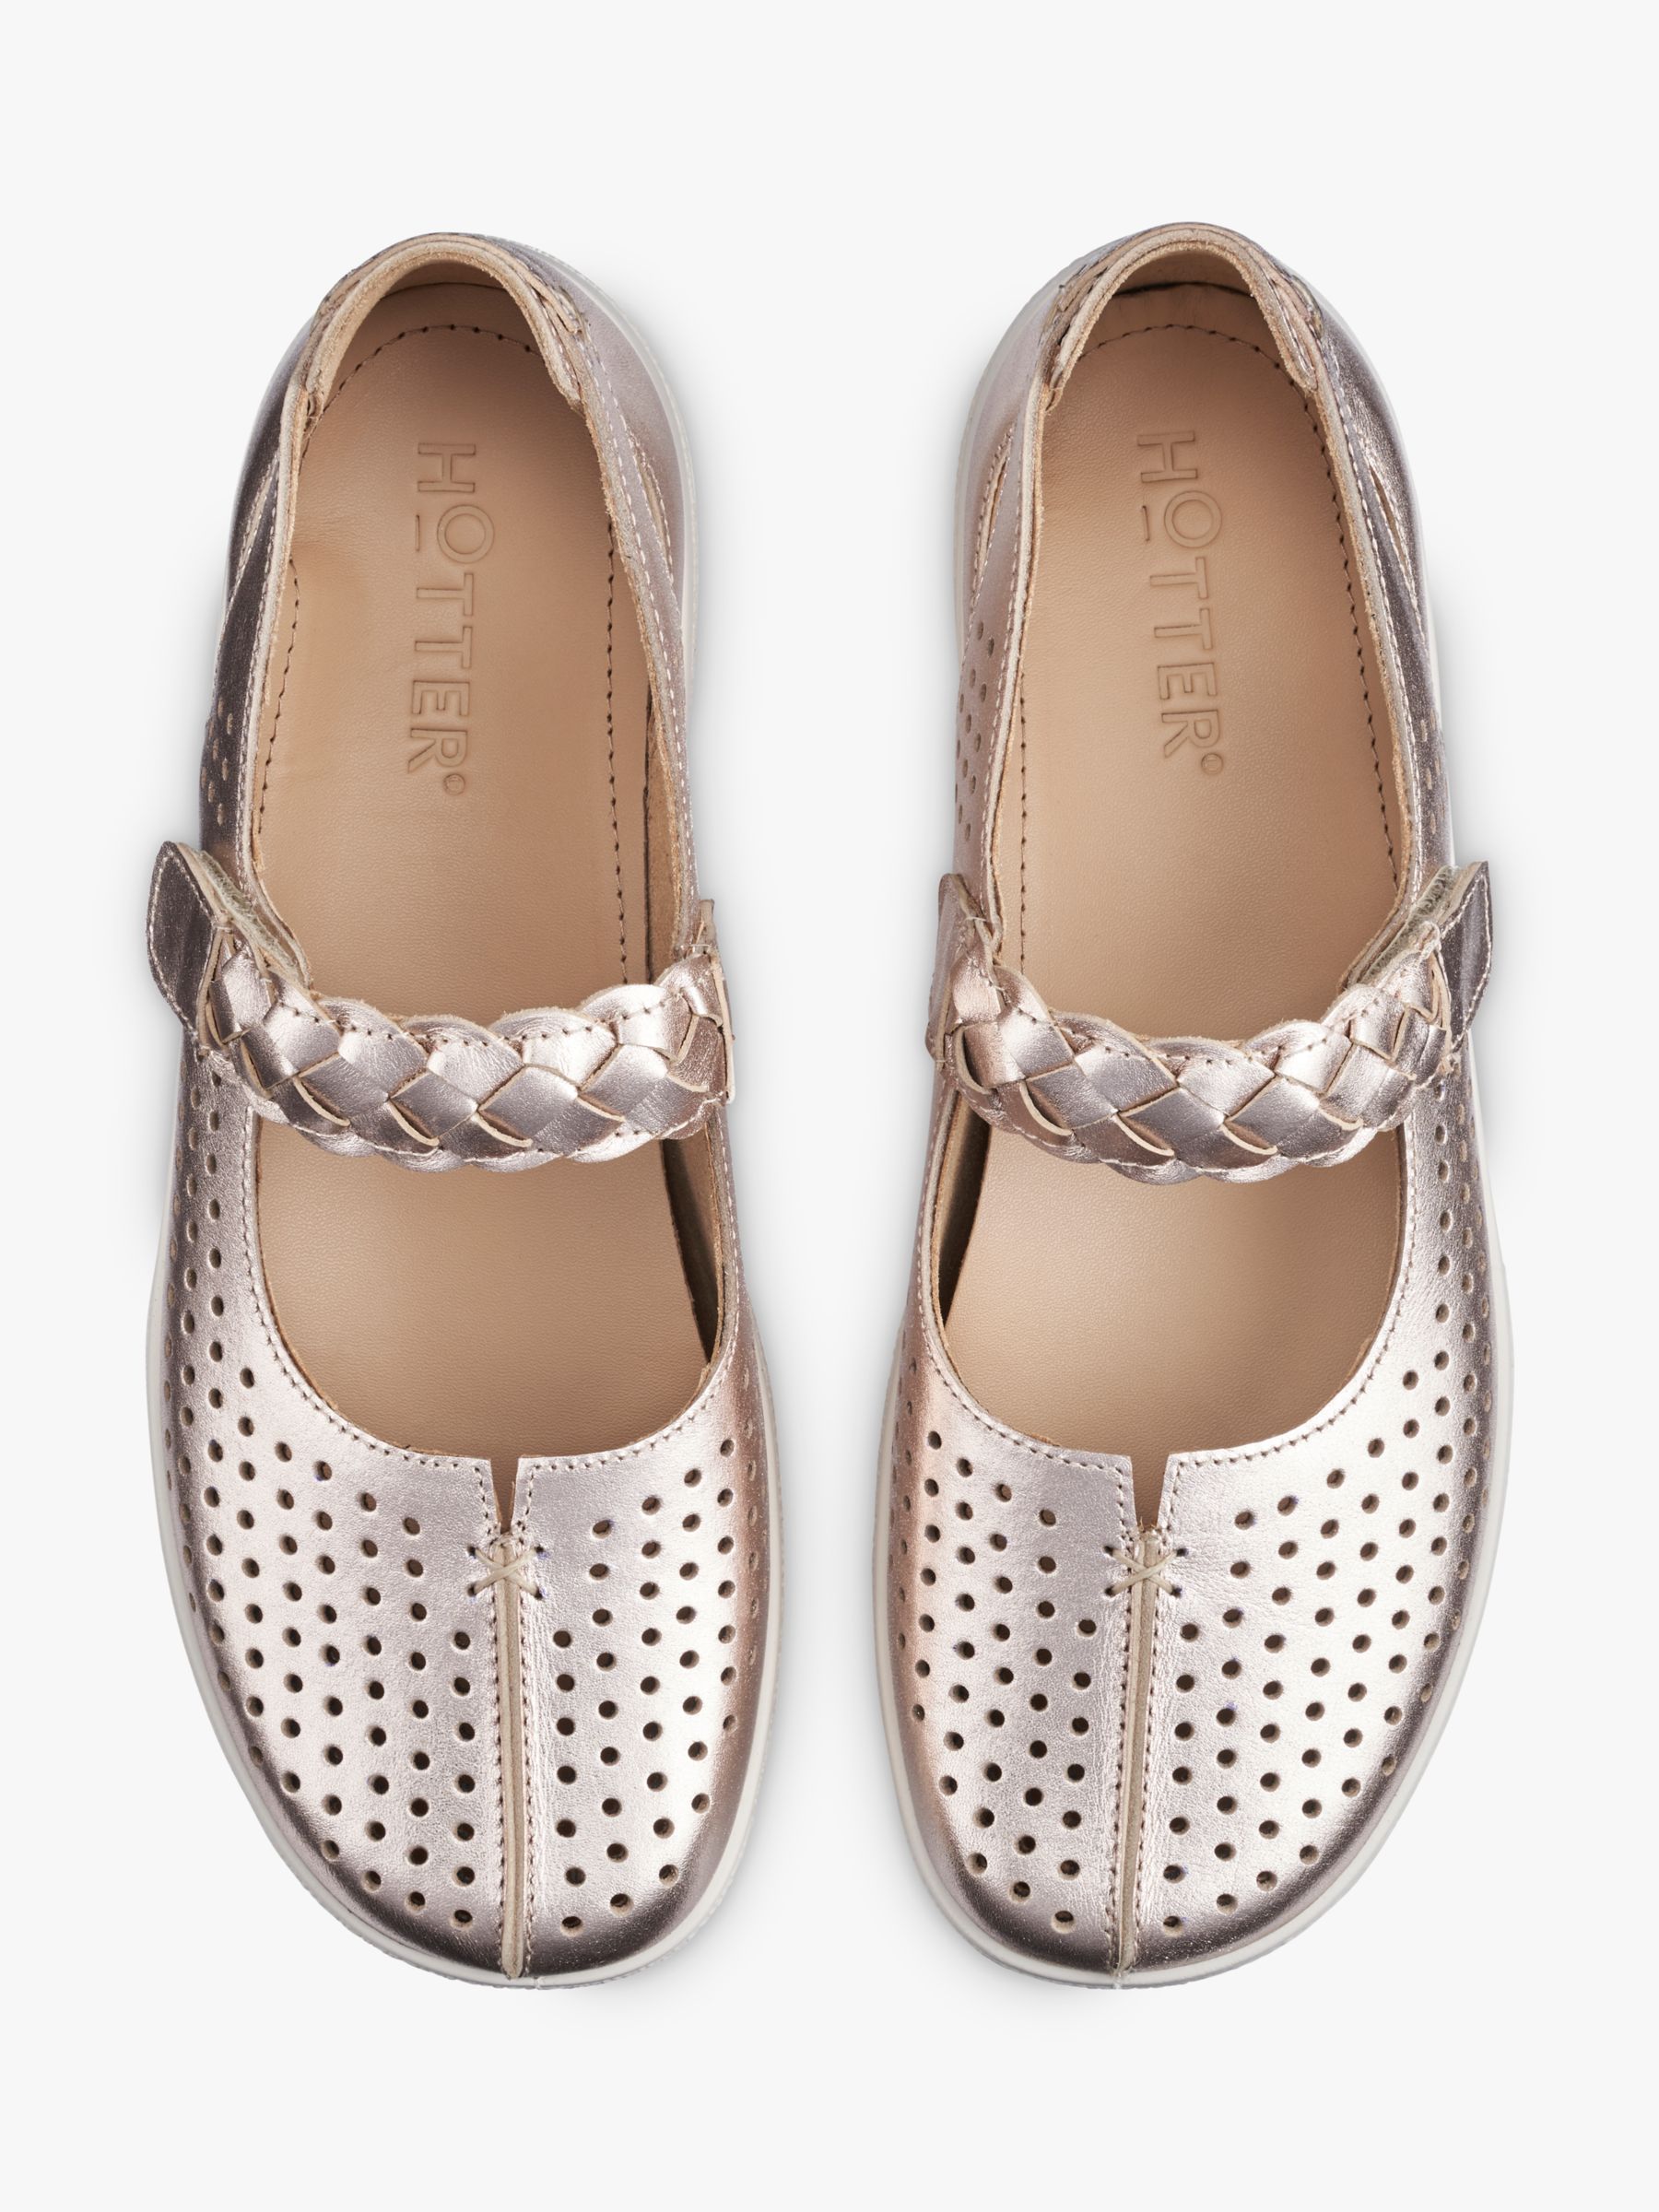 Buy Hotter Quake II Extra Wide Fit Perforated Leather Mary Jane Shoes, Soft Gold Online at johnlewis.com